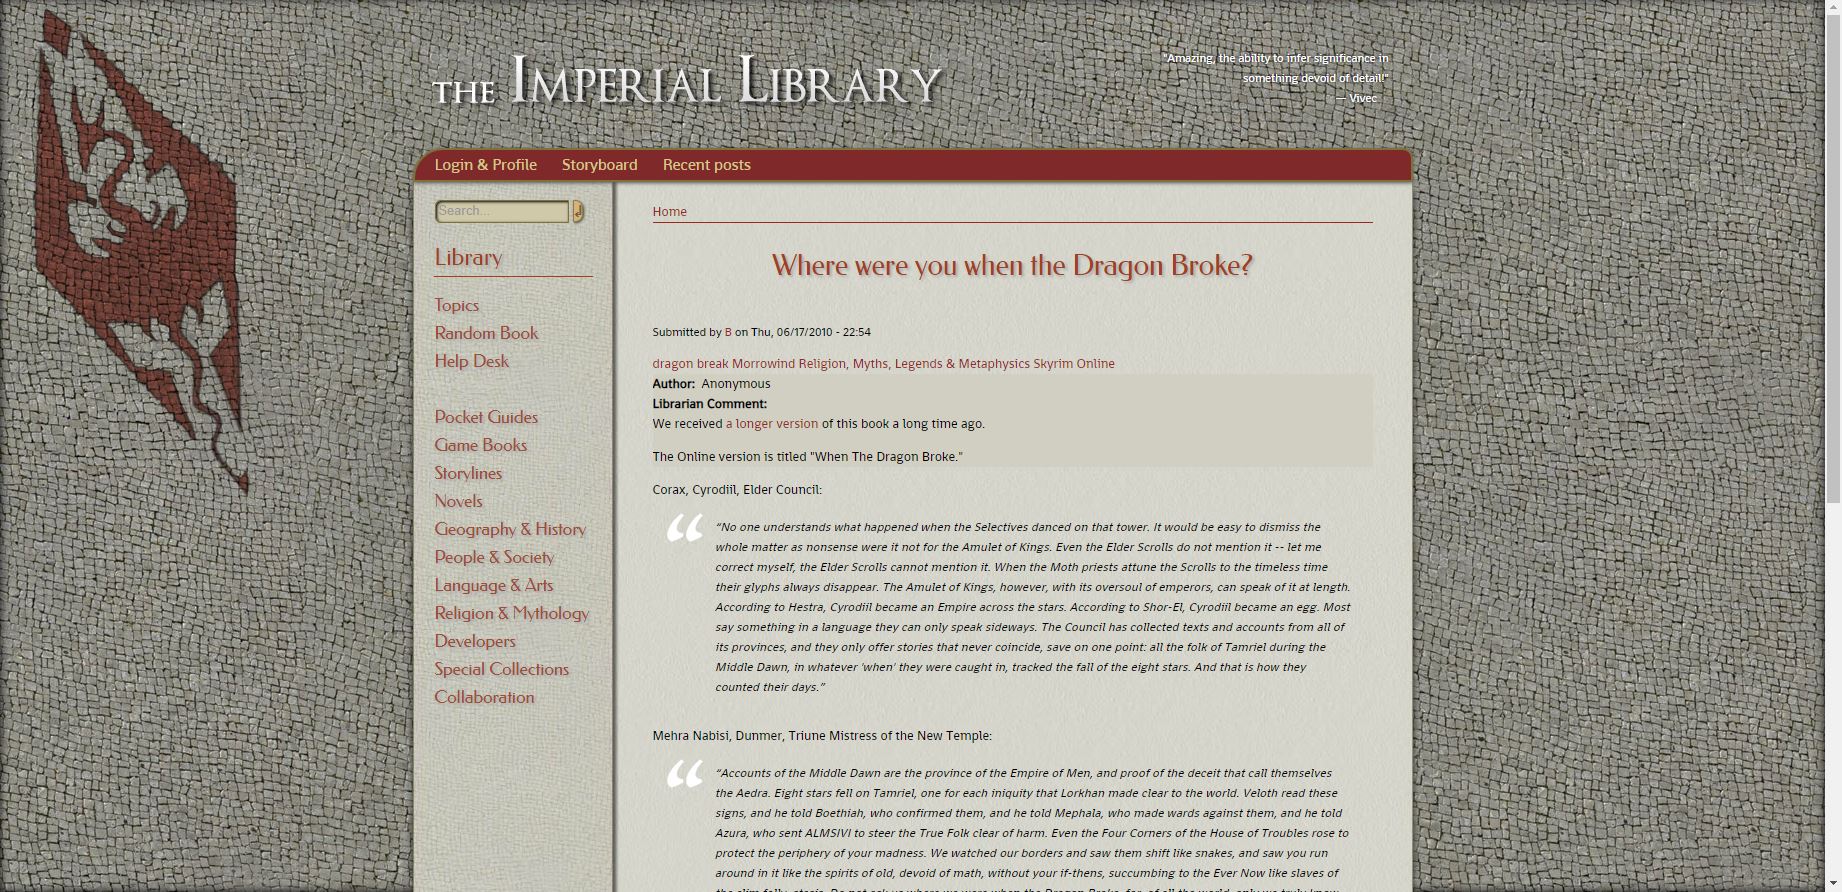 Where Were You When the Dragon Broke? asked by the Imperial Library